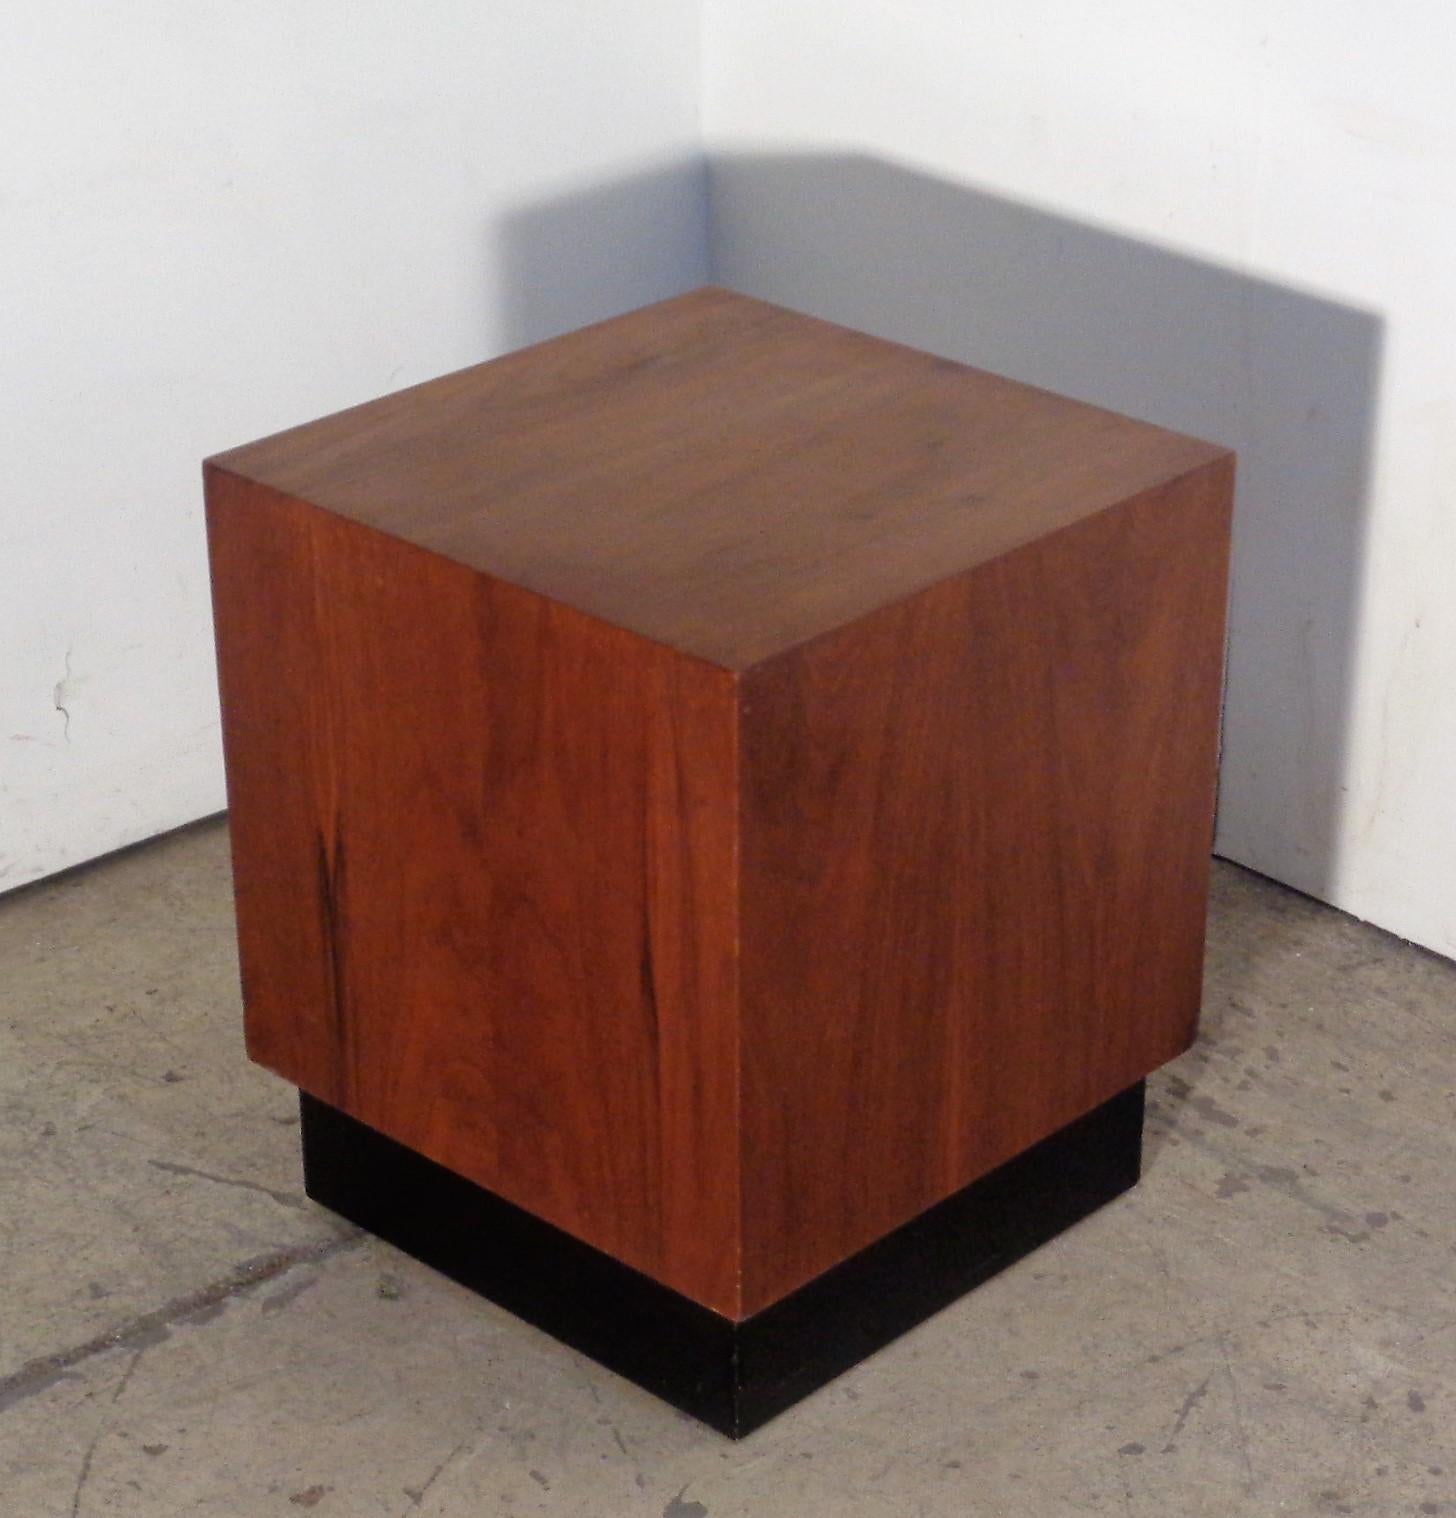 Adrian Pearsall floating walnut cube table in original finish w/ black painted recessed base and nicely figured grain to walnut veneer. Good looking Minimalist design. Measures 16